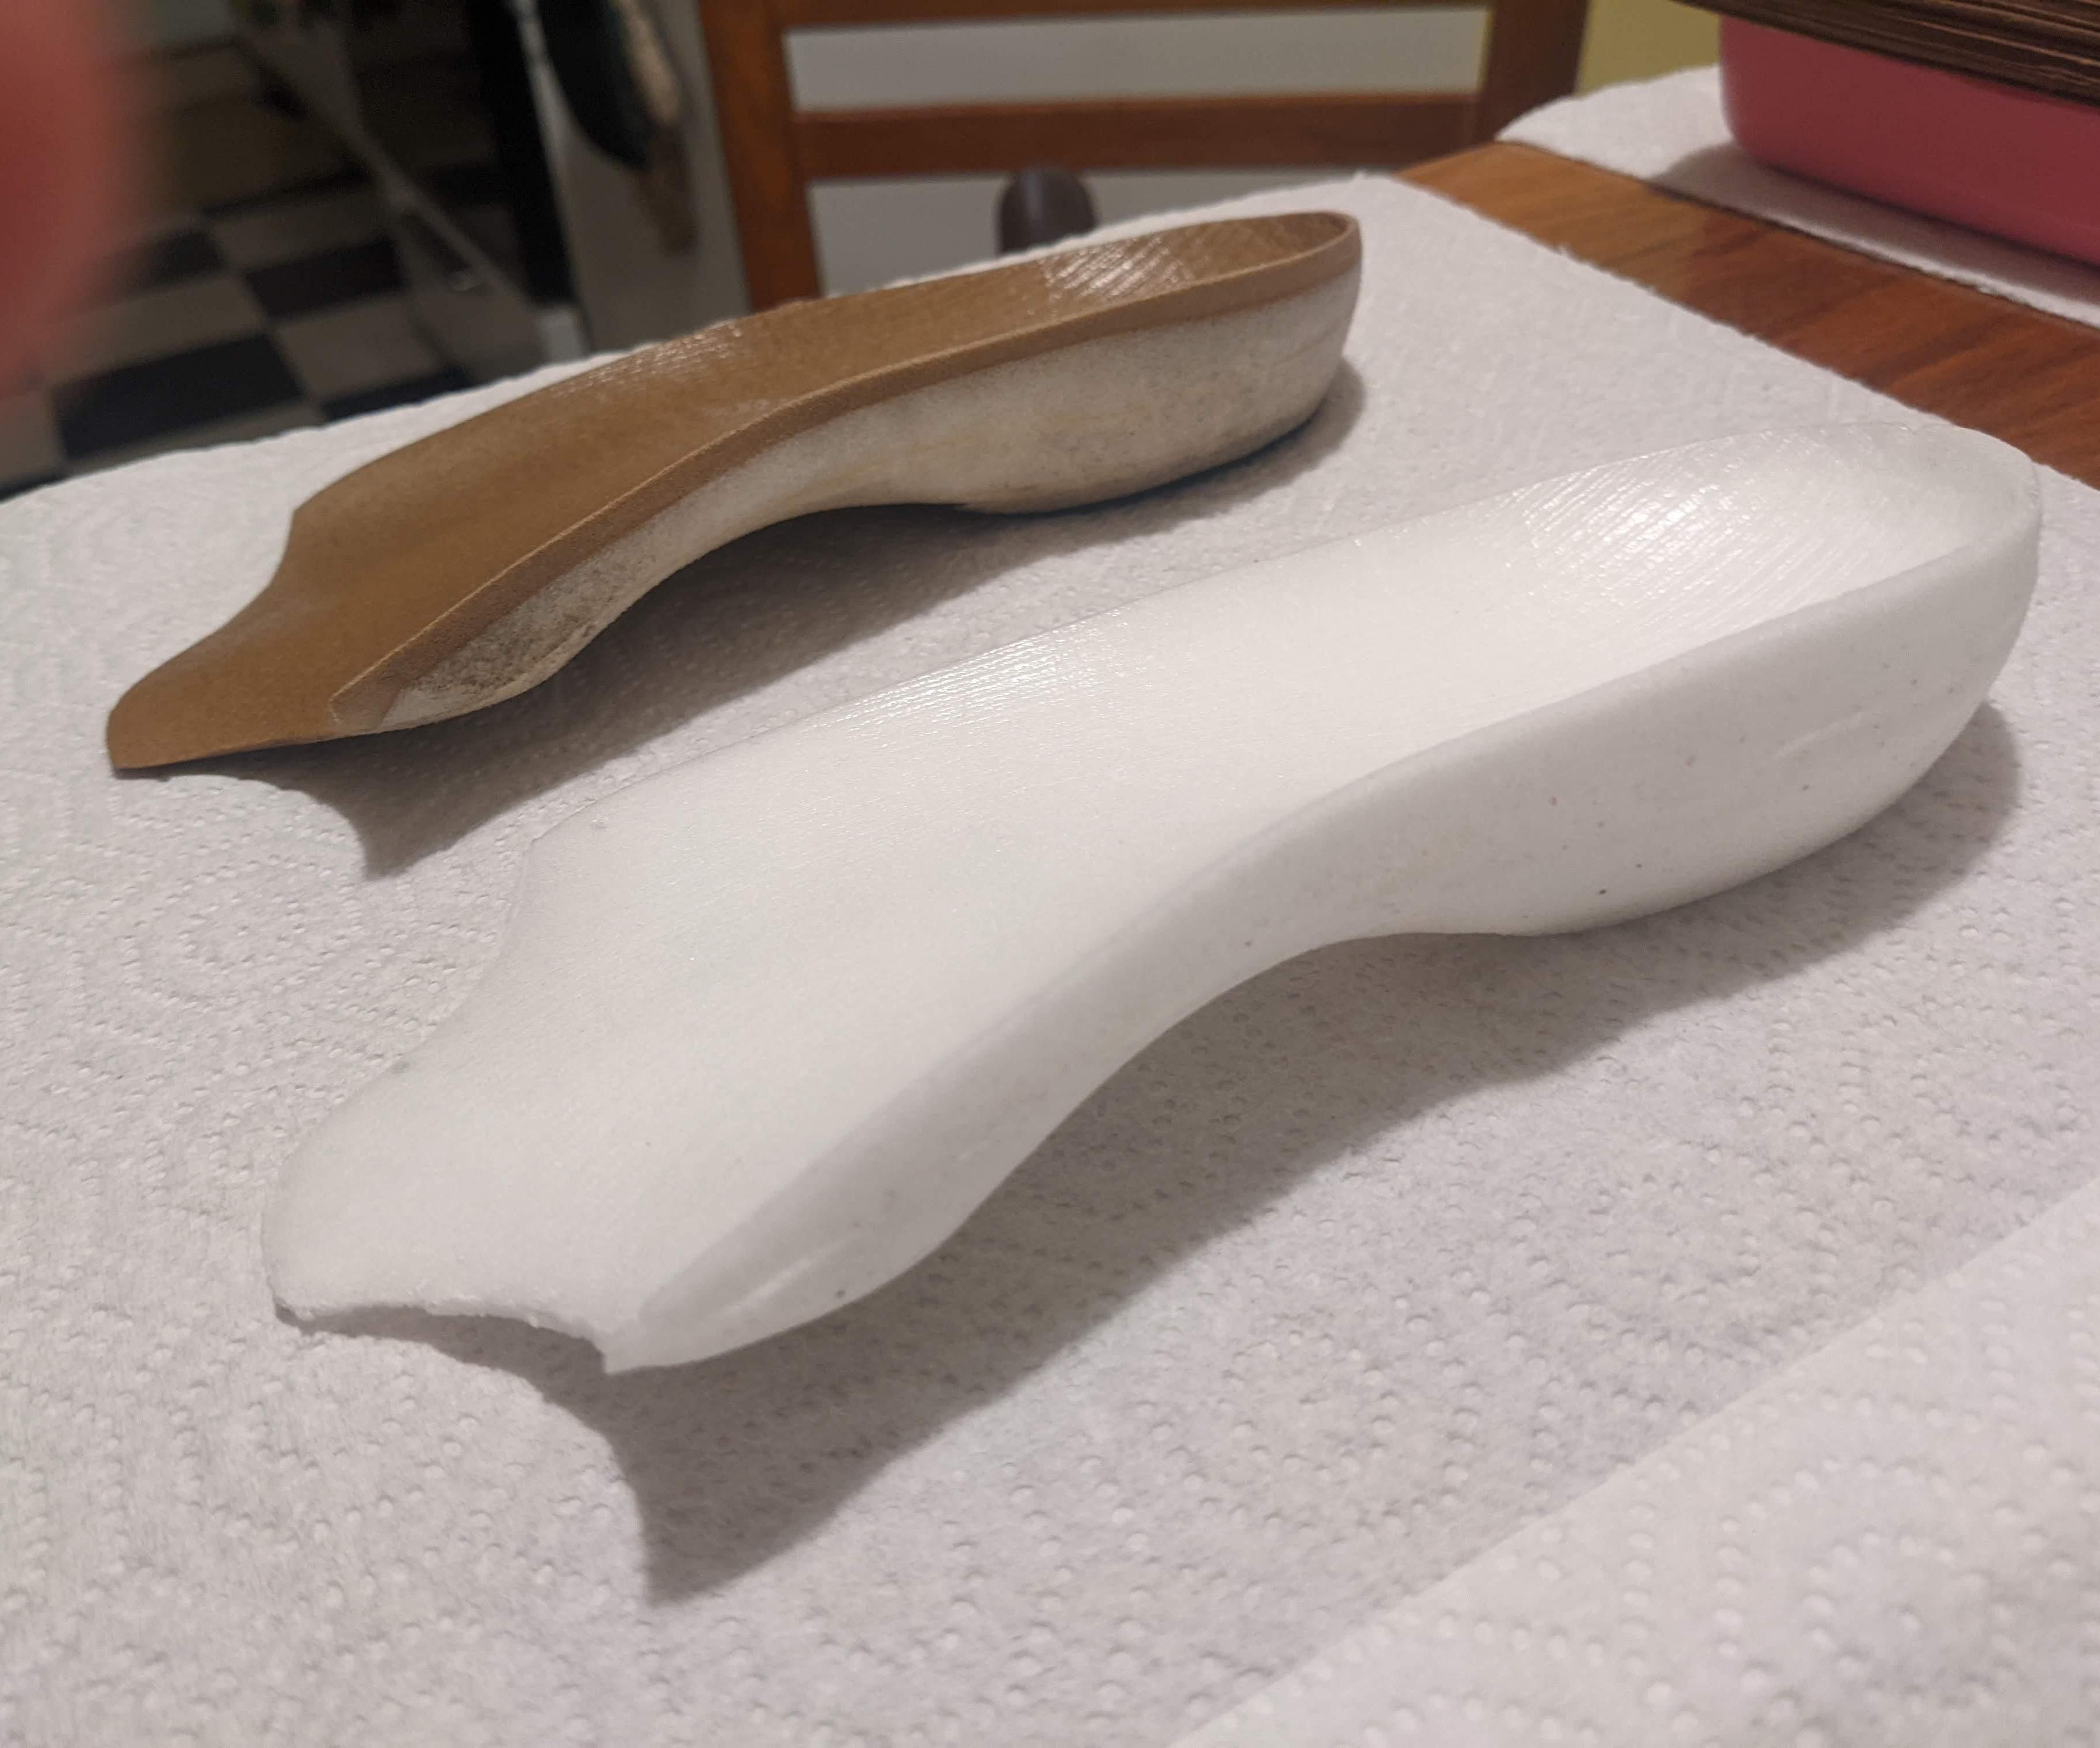 Casting New Foam Orthotics From Old Ones